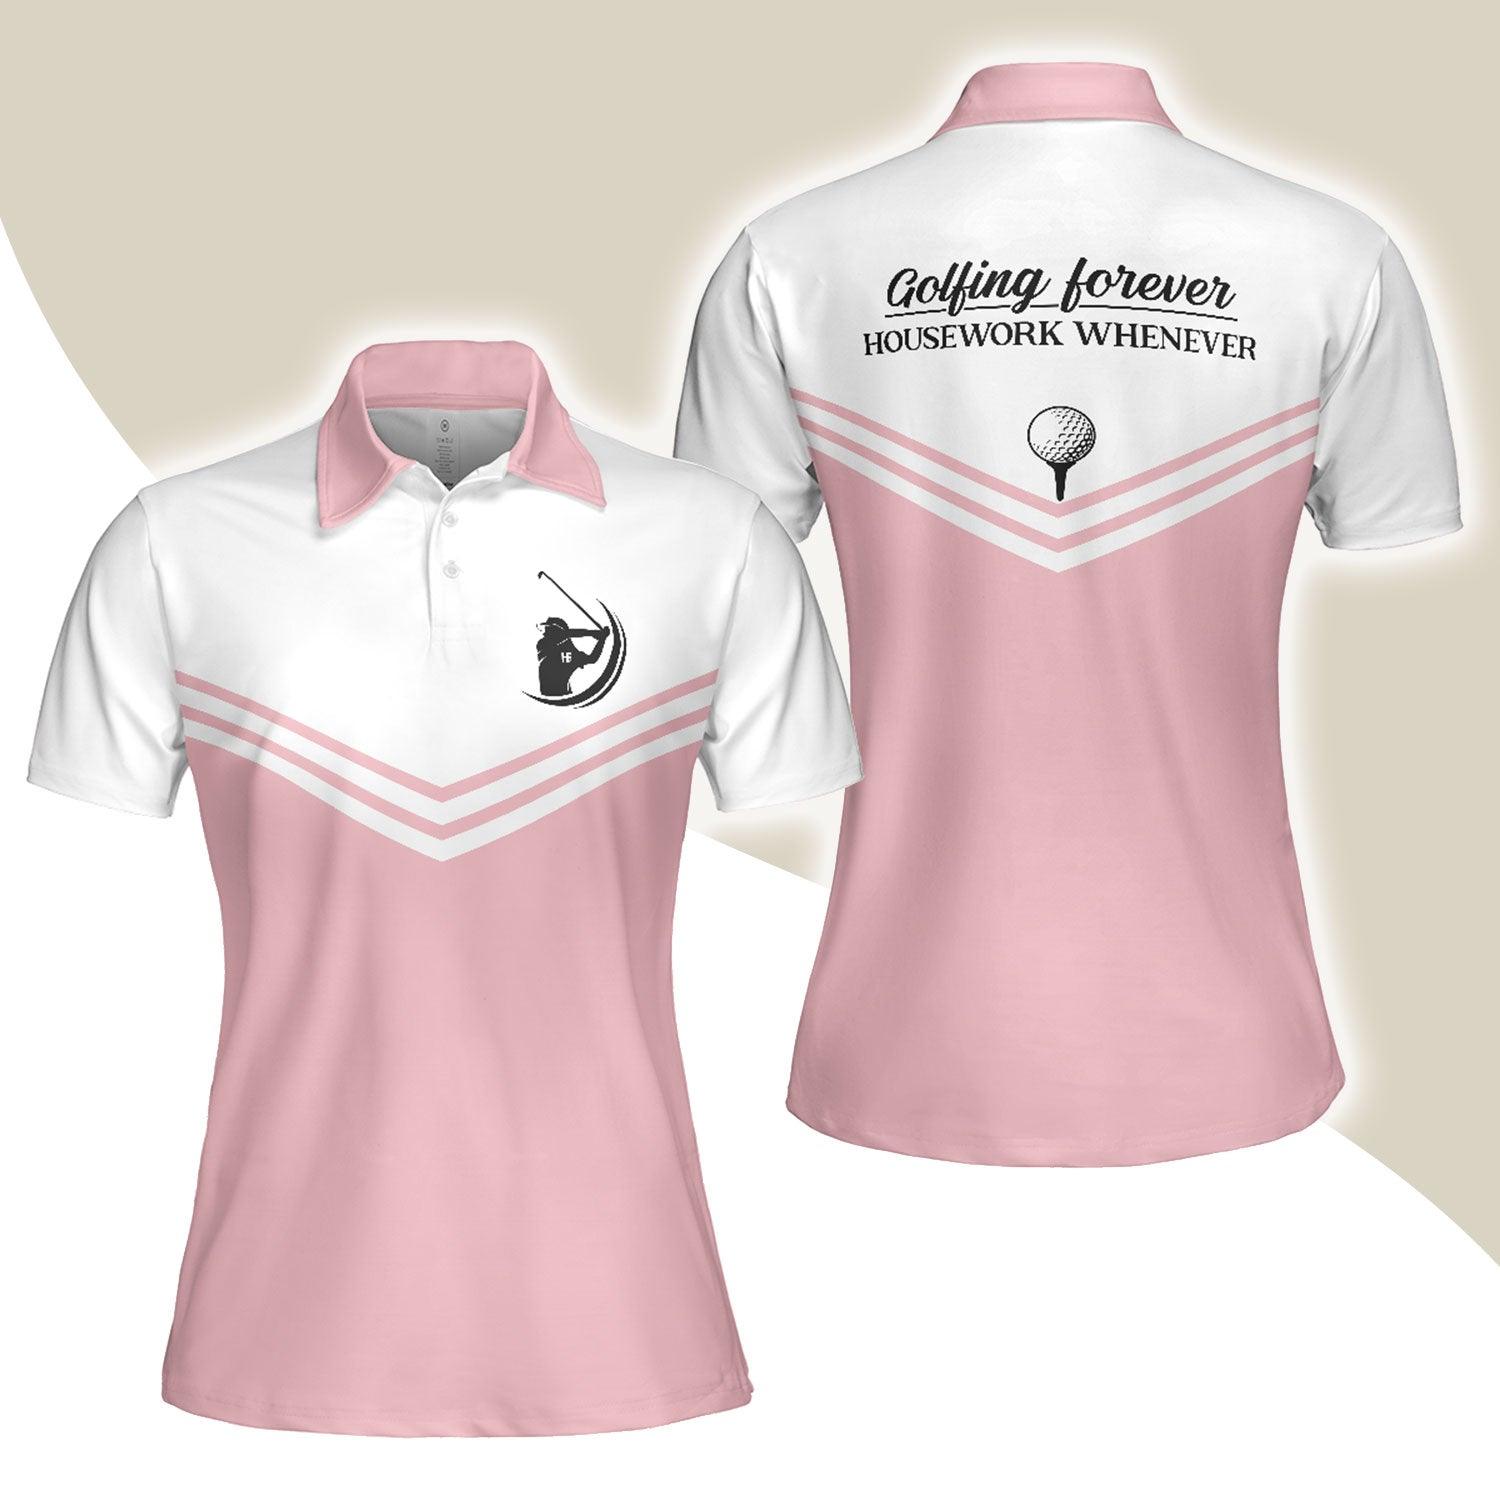 Golf Women Polo Shirt, Golfing Forever Housework Whenever, White And Light Pink Women Polo Shirts, Best Gift For Female Golfers, Ladies, Golf Lovers - Amzanimalsgift